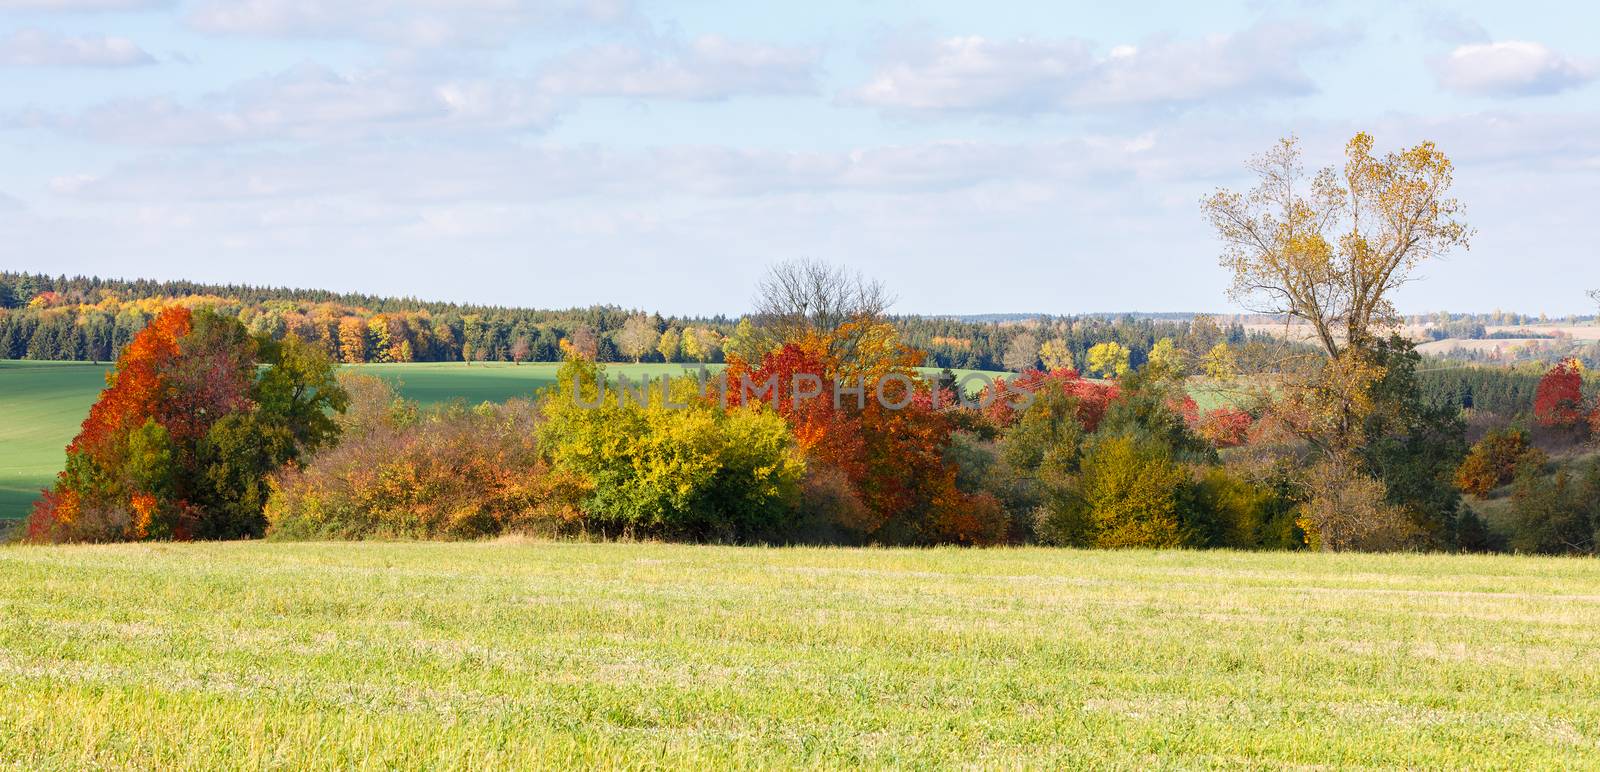 Autumn landscape with fall colored trees by artush